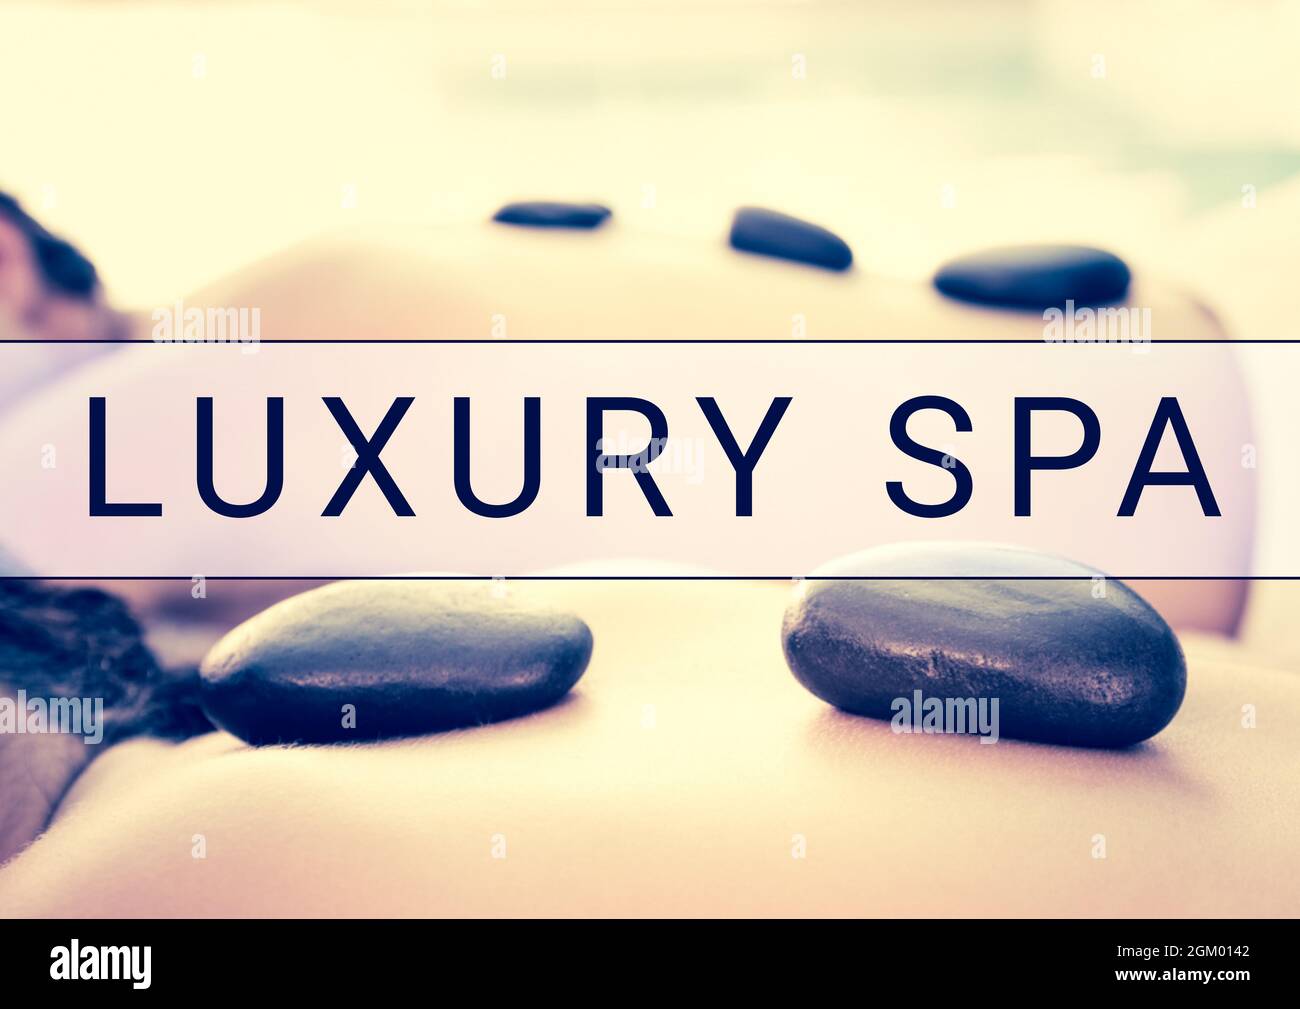 Luxury spa text banner over close up of woman lying for a massage Stock Photo